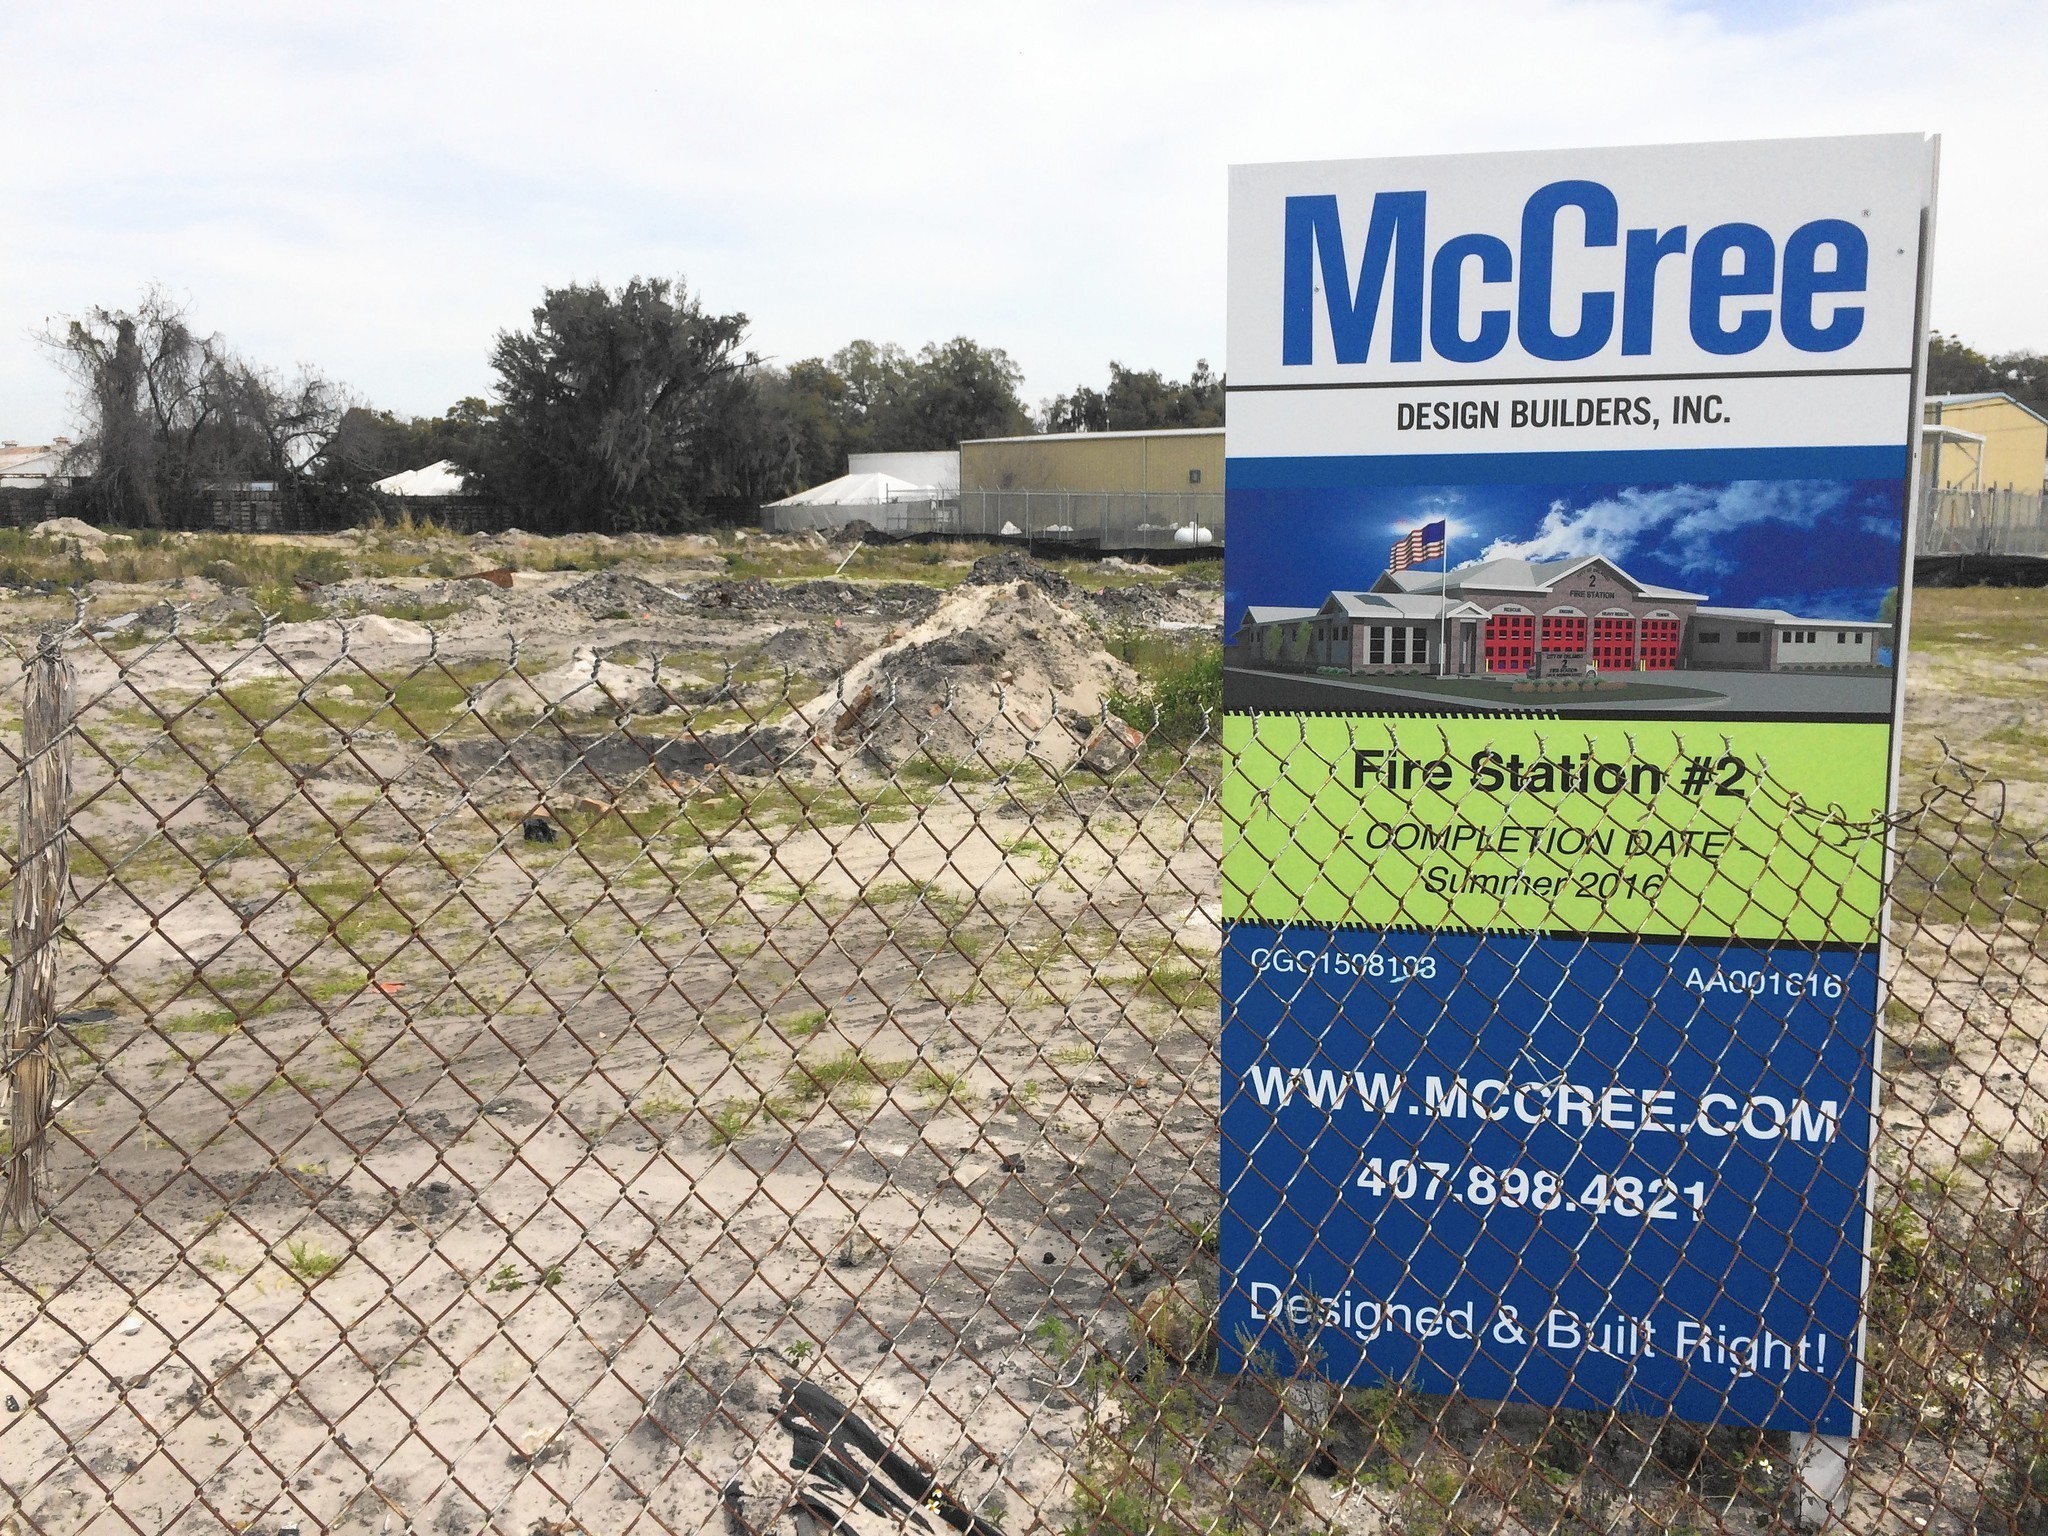 2M Cleanup Set For Parramore Fire Station Site Orlando Sentinel